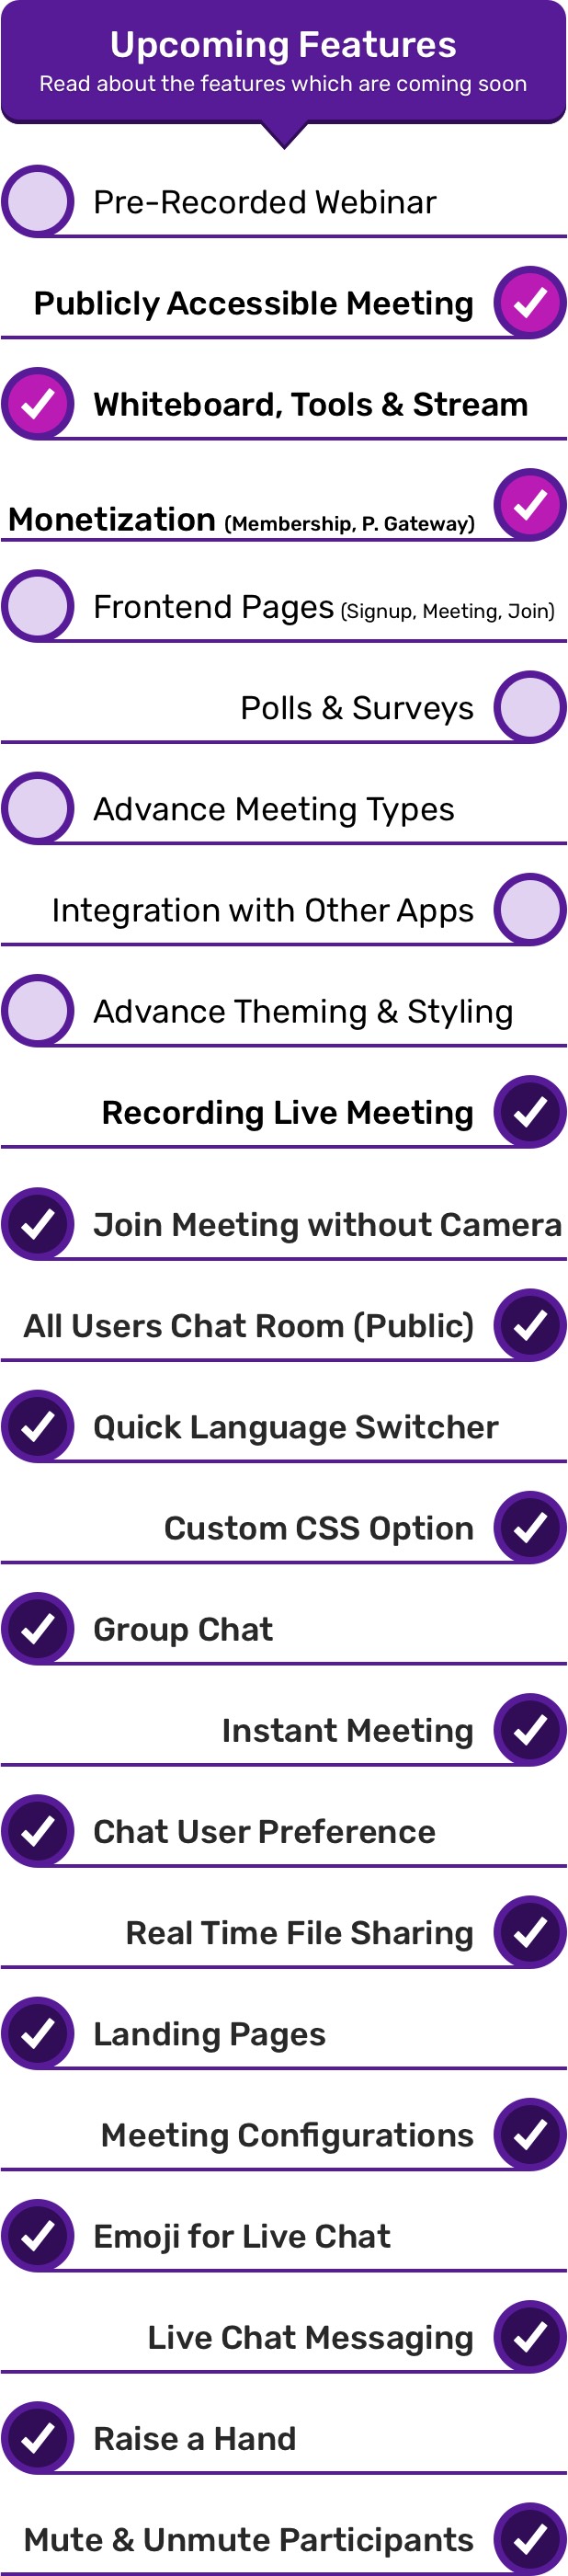 Connect - Upcoming Features - Recording, Pre-recorded Webinar, WhiteBoard, Click to Call